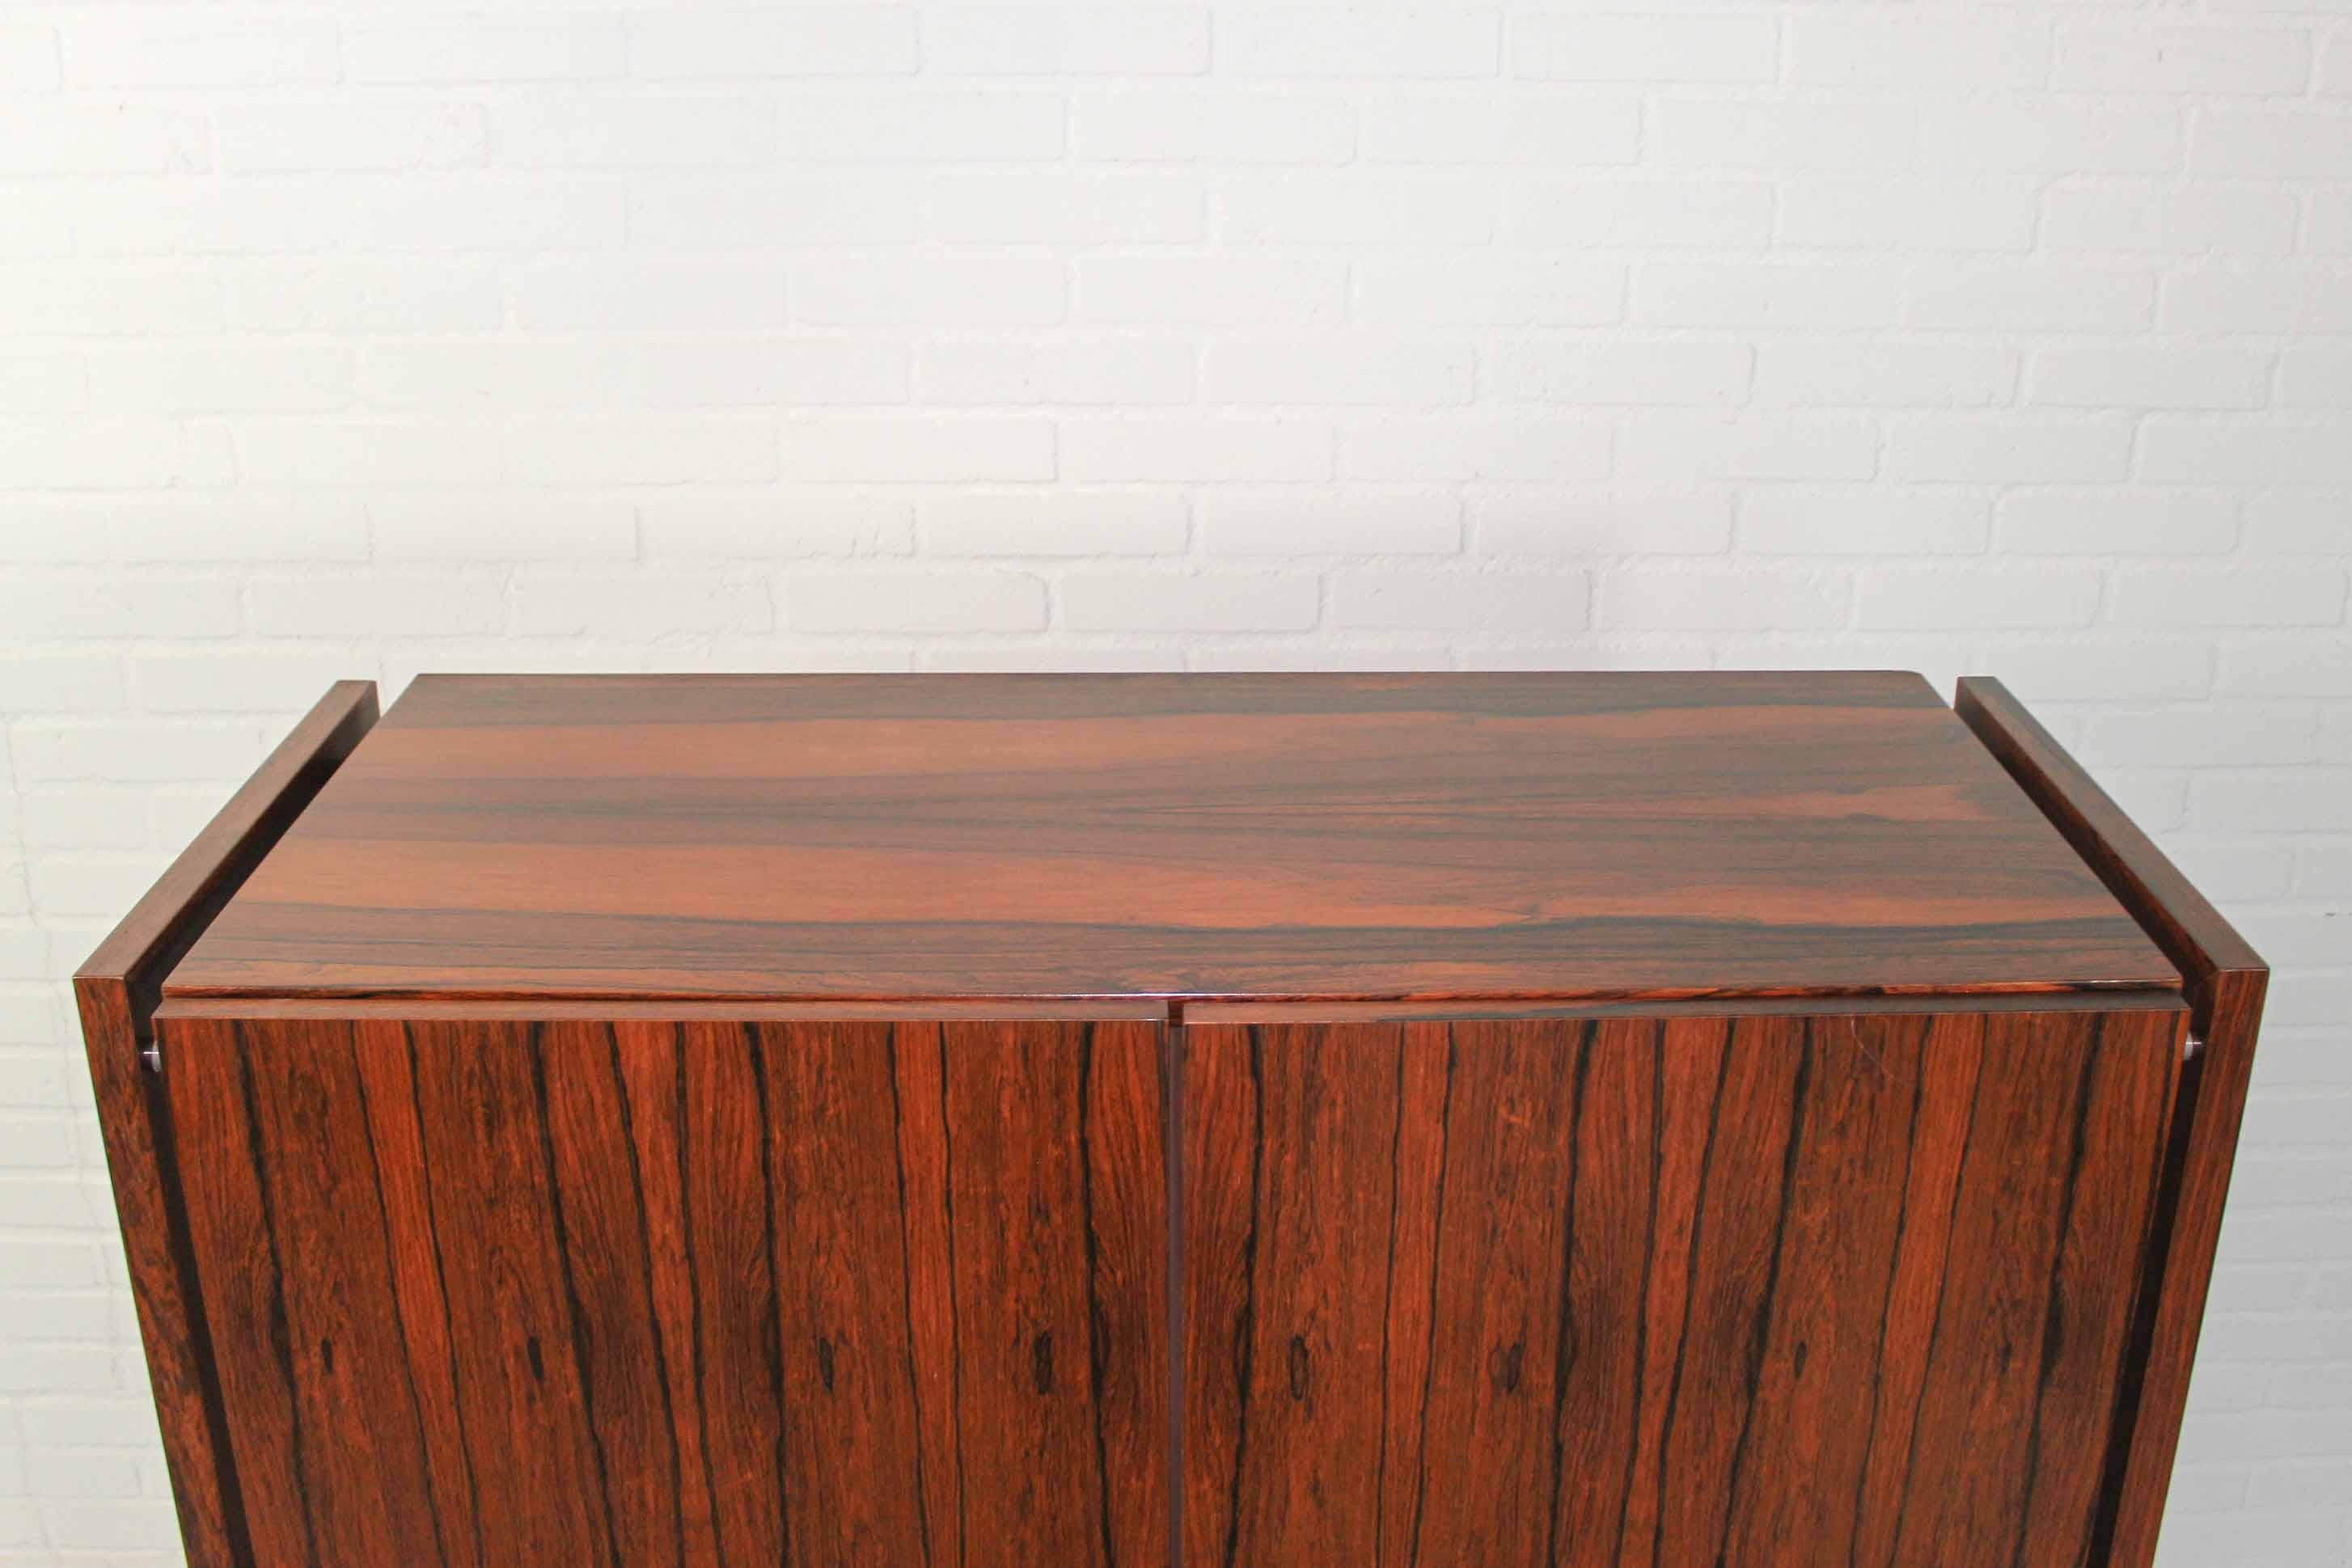 Highboard “Malmo” Within Wood Frame, Executed in Rio Palissander, 1960s 3